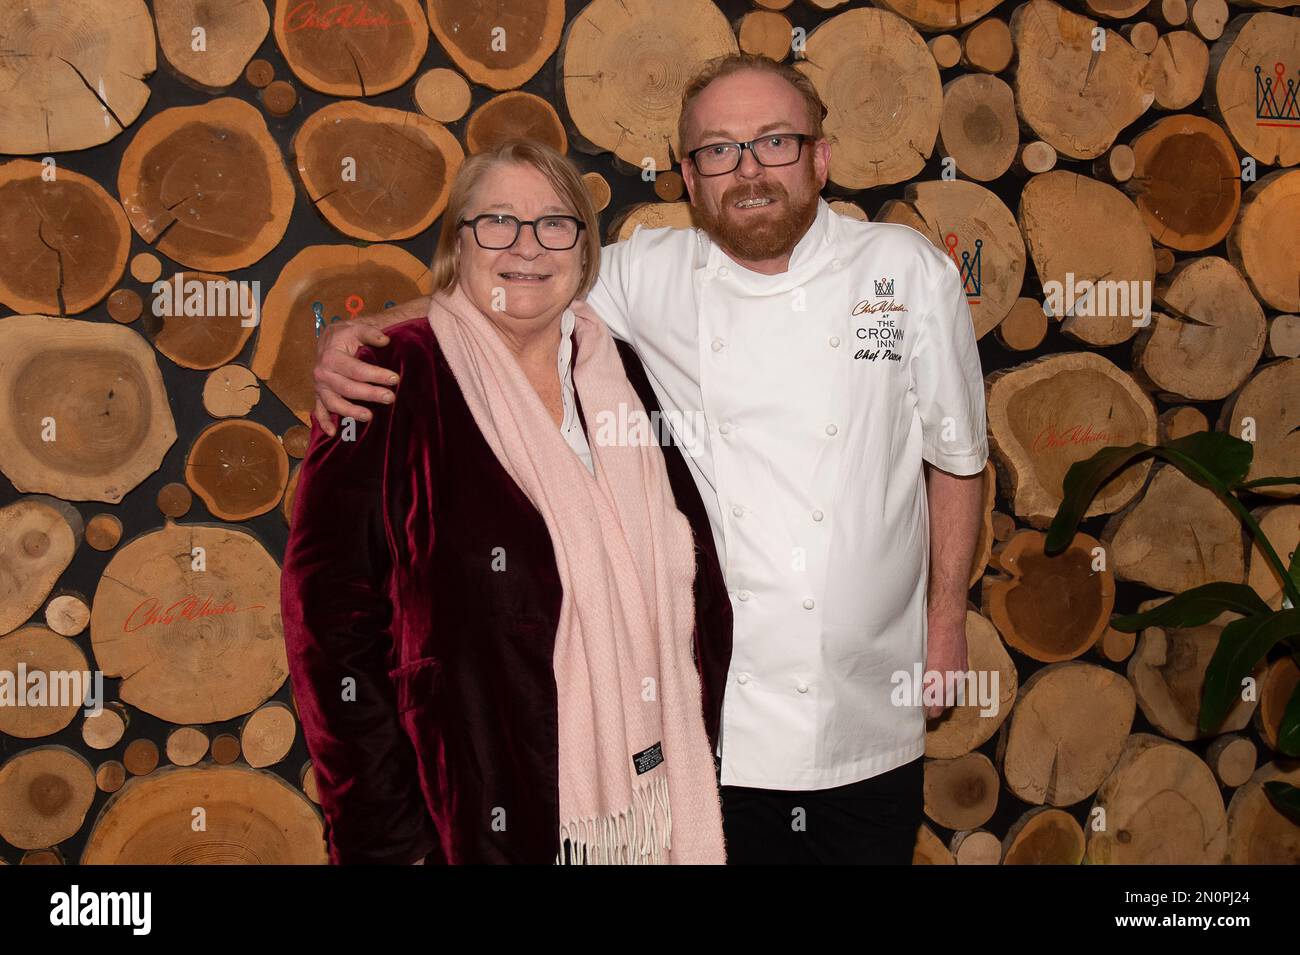 Farnham Royal, UK. 2nd February, 2023. Celebrity Chef Rosemary Shrager and Celebrity Chef Chris Wheeler at the pre opening event at the Crown Inn. Chris Wheeler who was the Executive Chef at the former Humphry's Restaurant at Stoke Park for almost 20 years has now opened a new restaurant called Chris Wheeler at the Crown Inn together with business partner and pub owner Russell Allen. The restaurant at the Crown Inn in Farnham Royal, Slough opened for business on Saturday 4th February 2023. Credit: Maureen McLean/Alamy Stock Photo